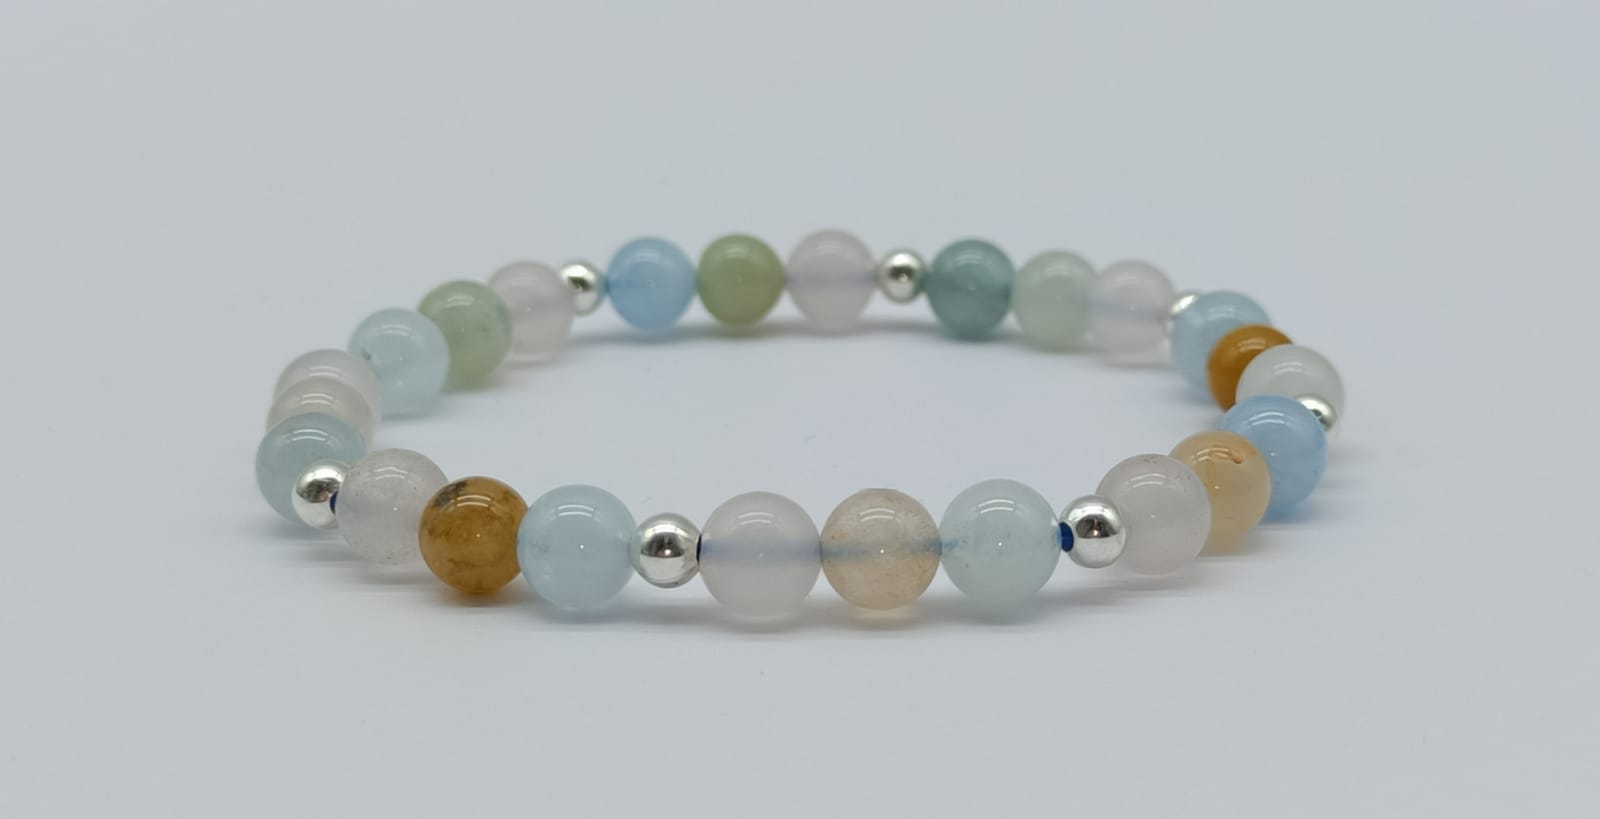 Bracelet of Love and Serenity 6mm